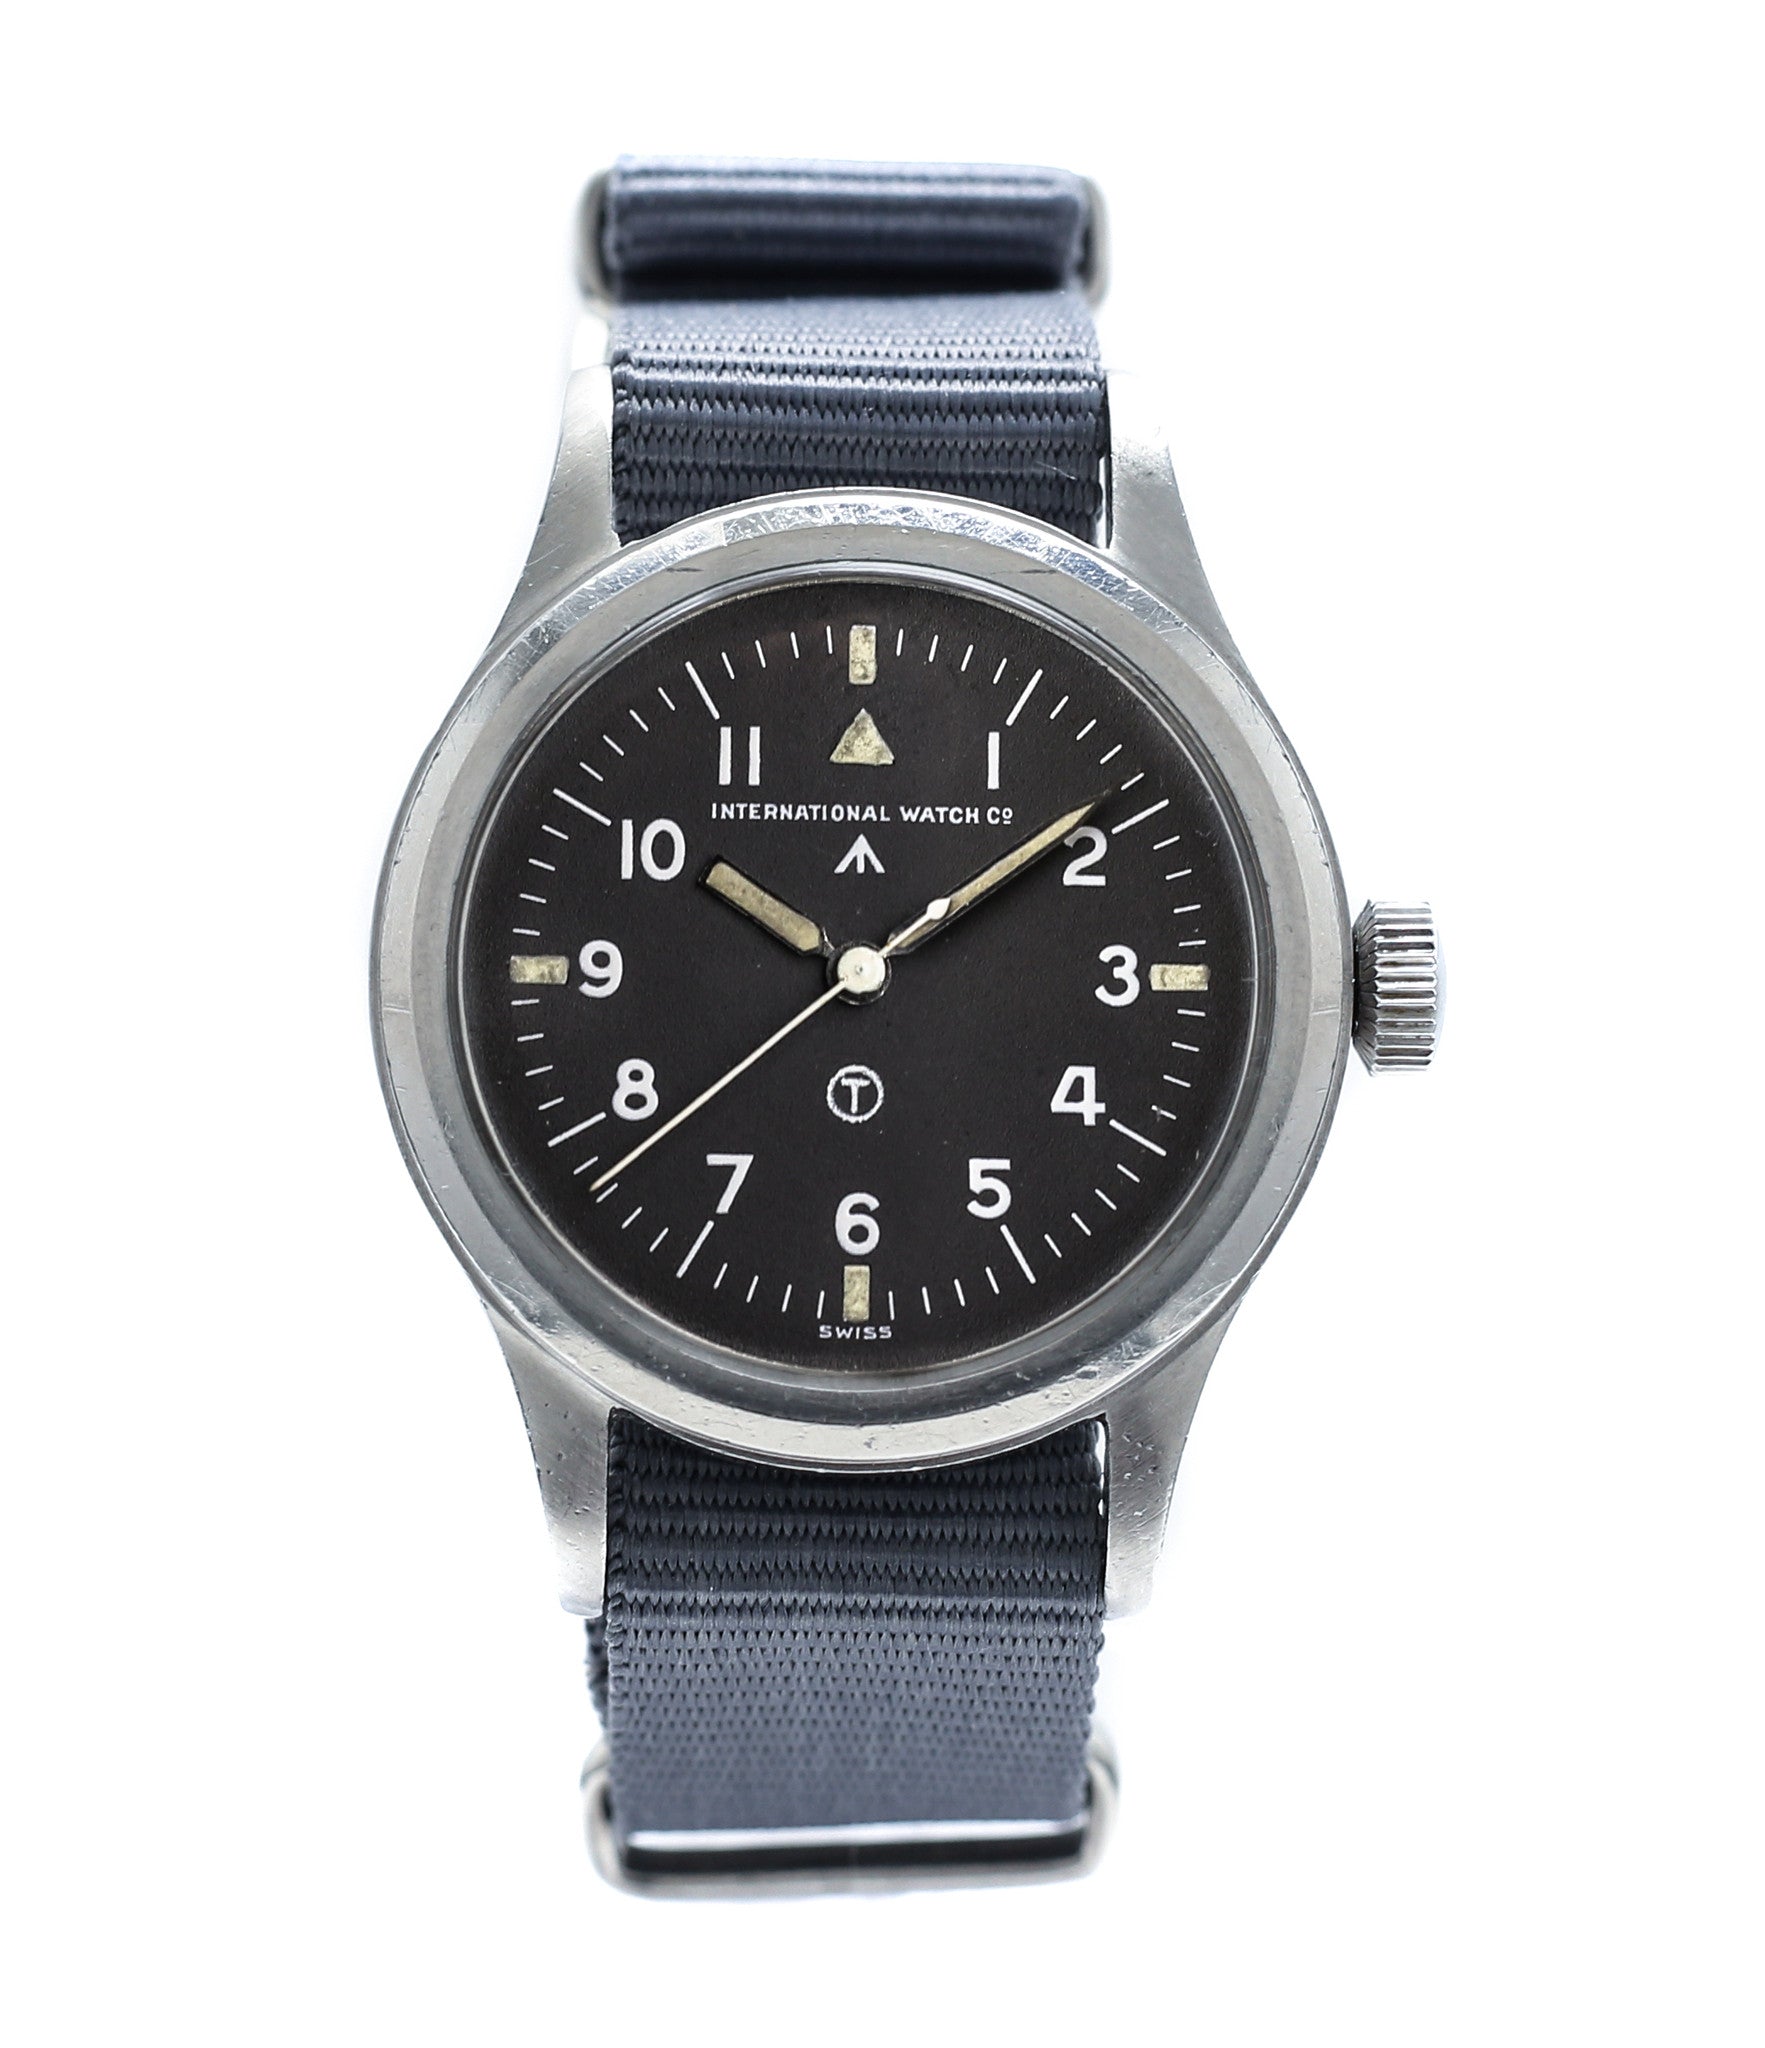 iwc mark 11 for sale